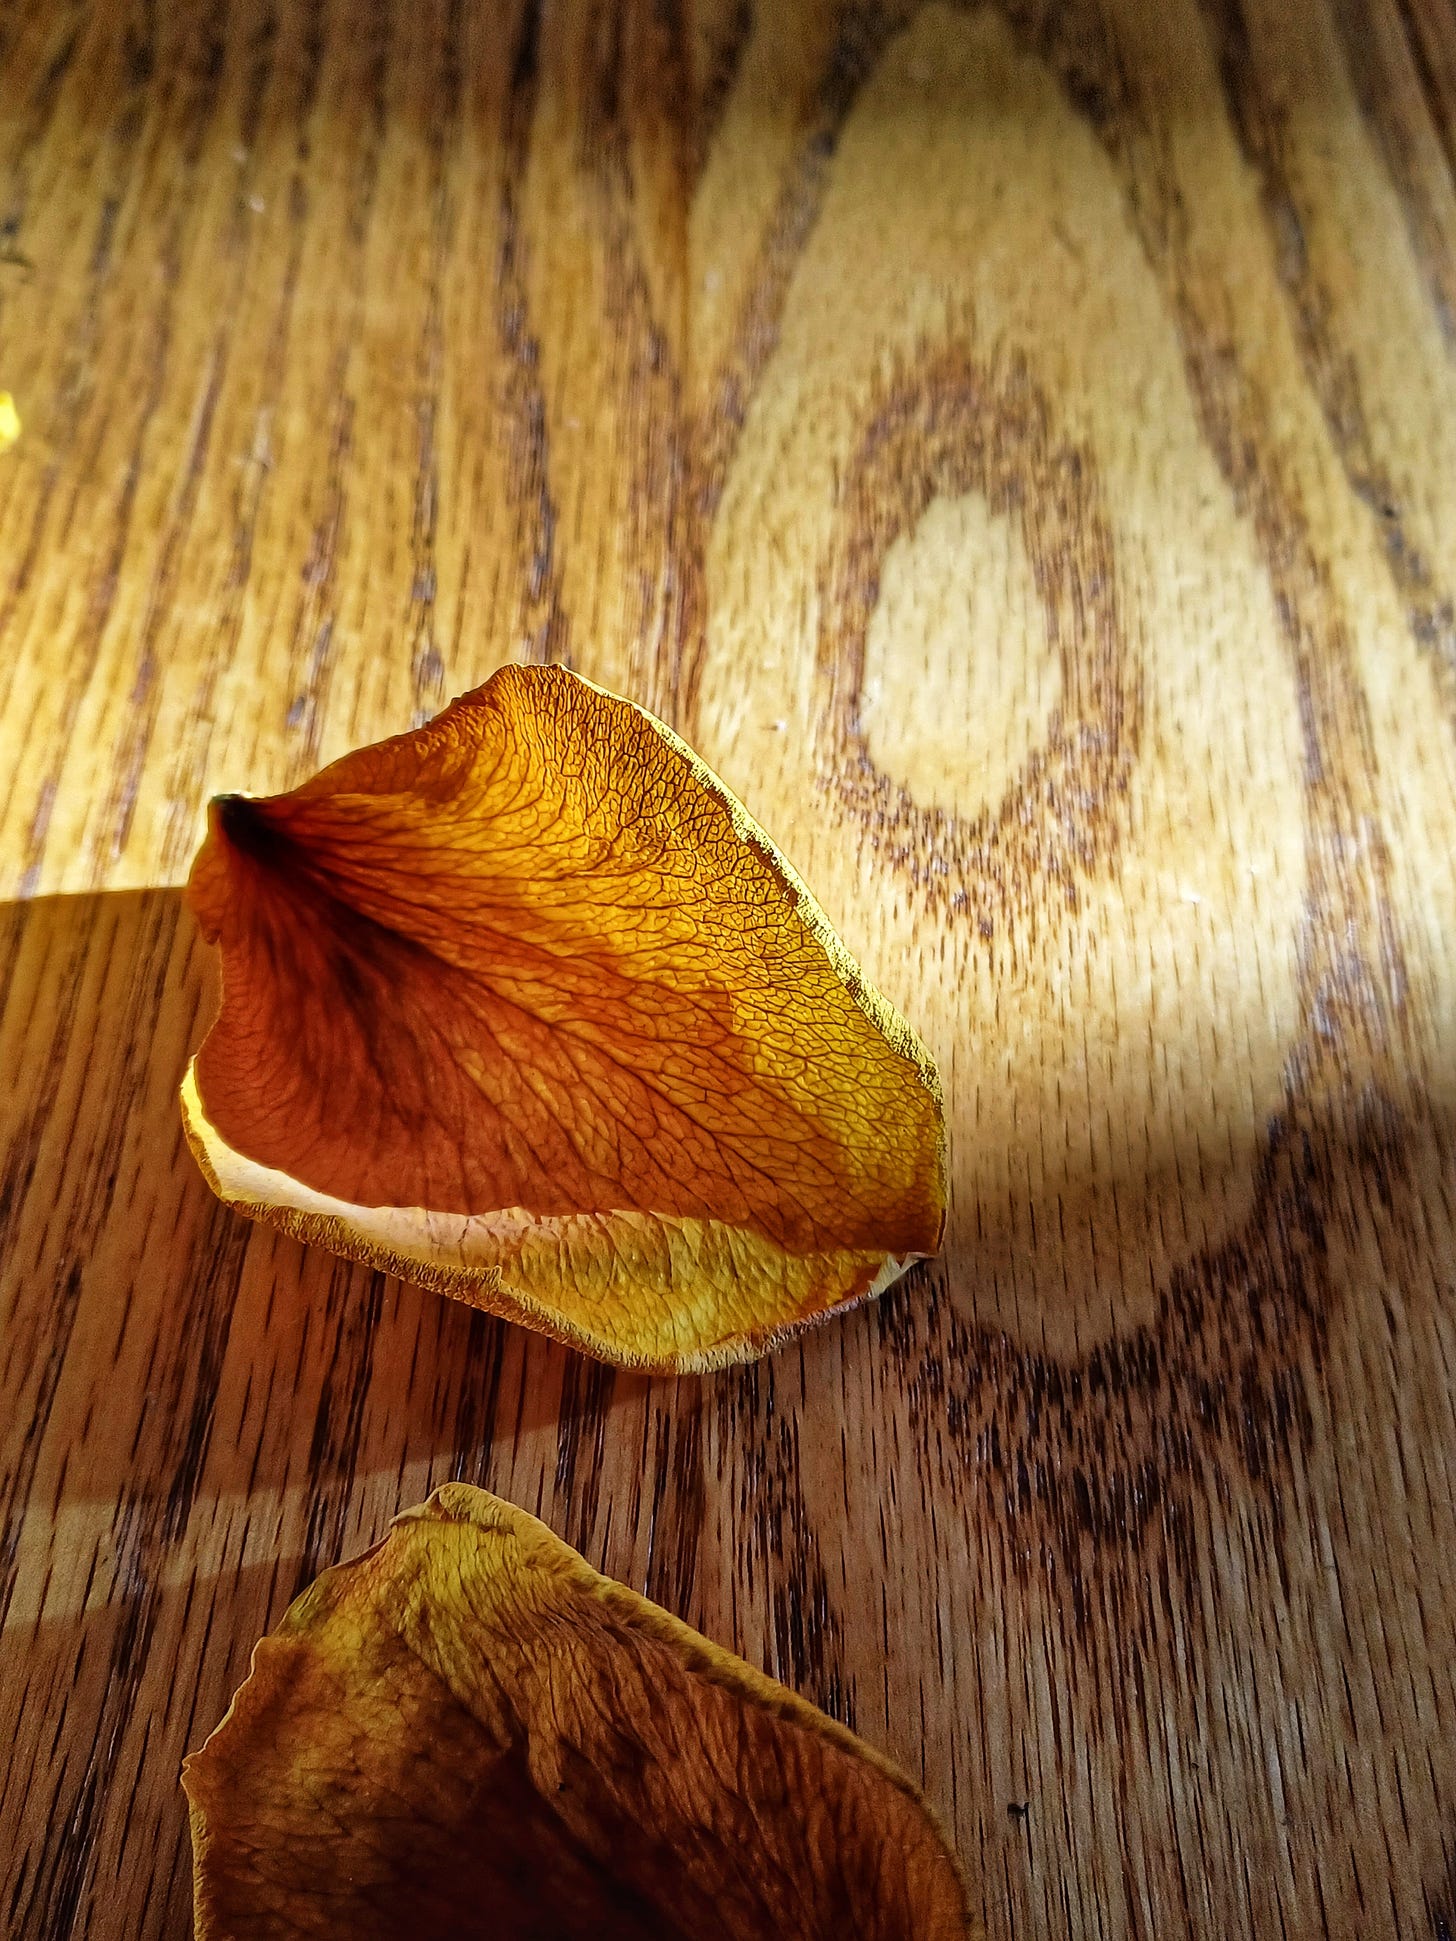 Rose petal in winter sun on wood grained surface. 